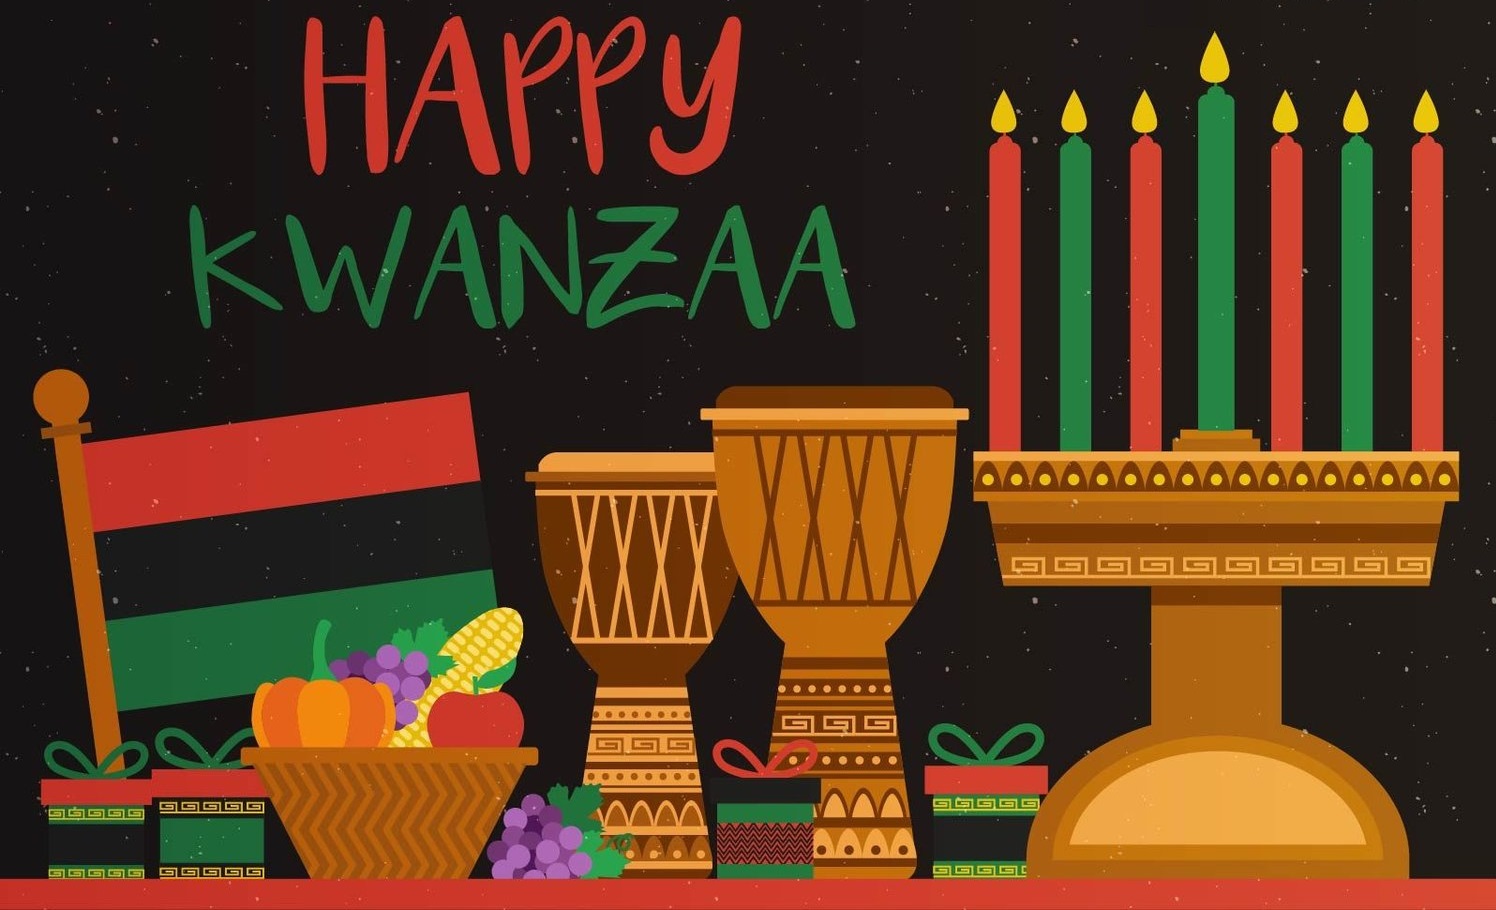 Image of a table with African drums, fruit and a kinara which is a seven-branched candleholder used in Kwanzaa celebrations in the United States. The words say Happy Kwanzaa. 